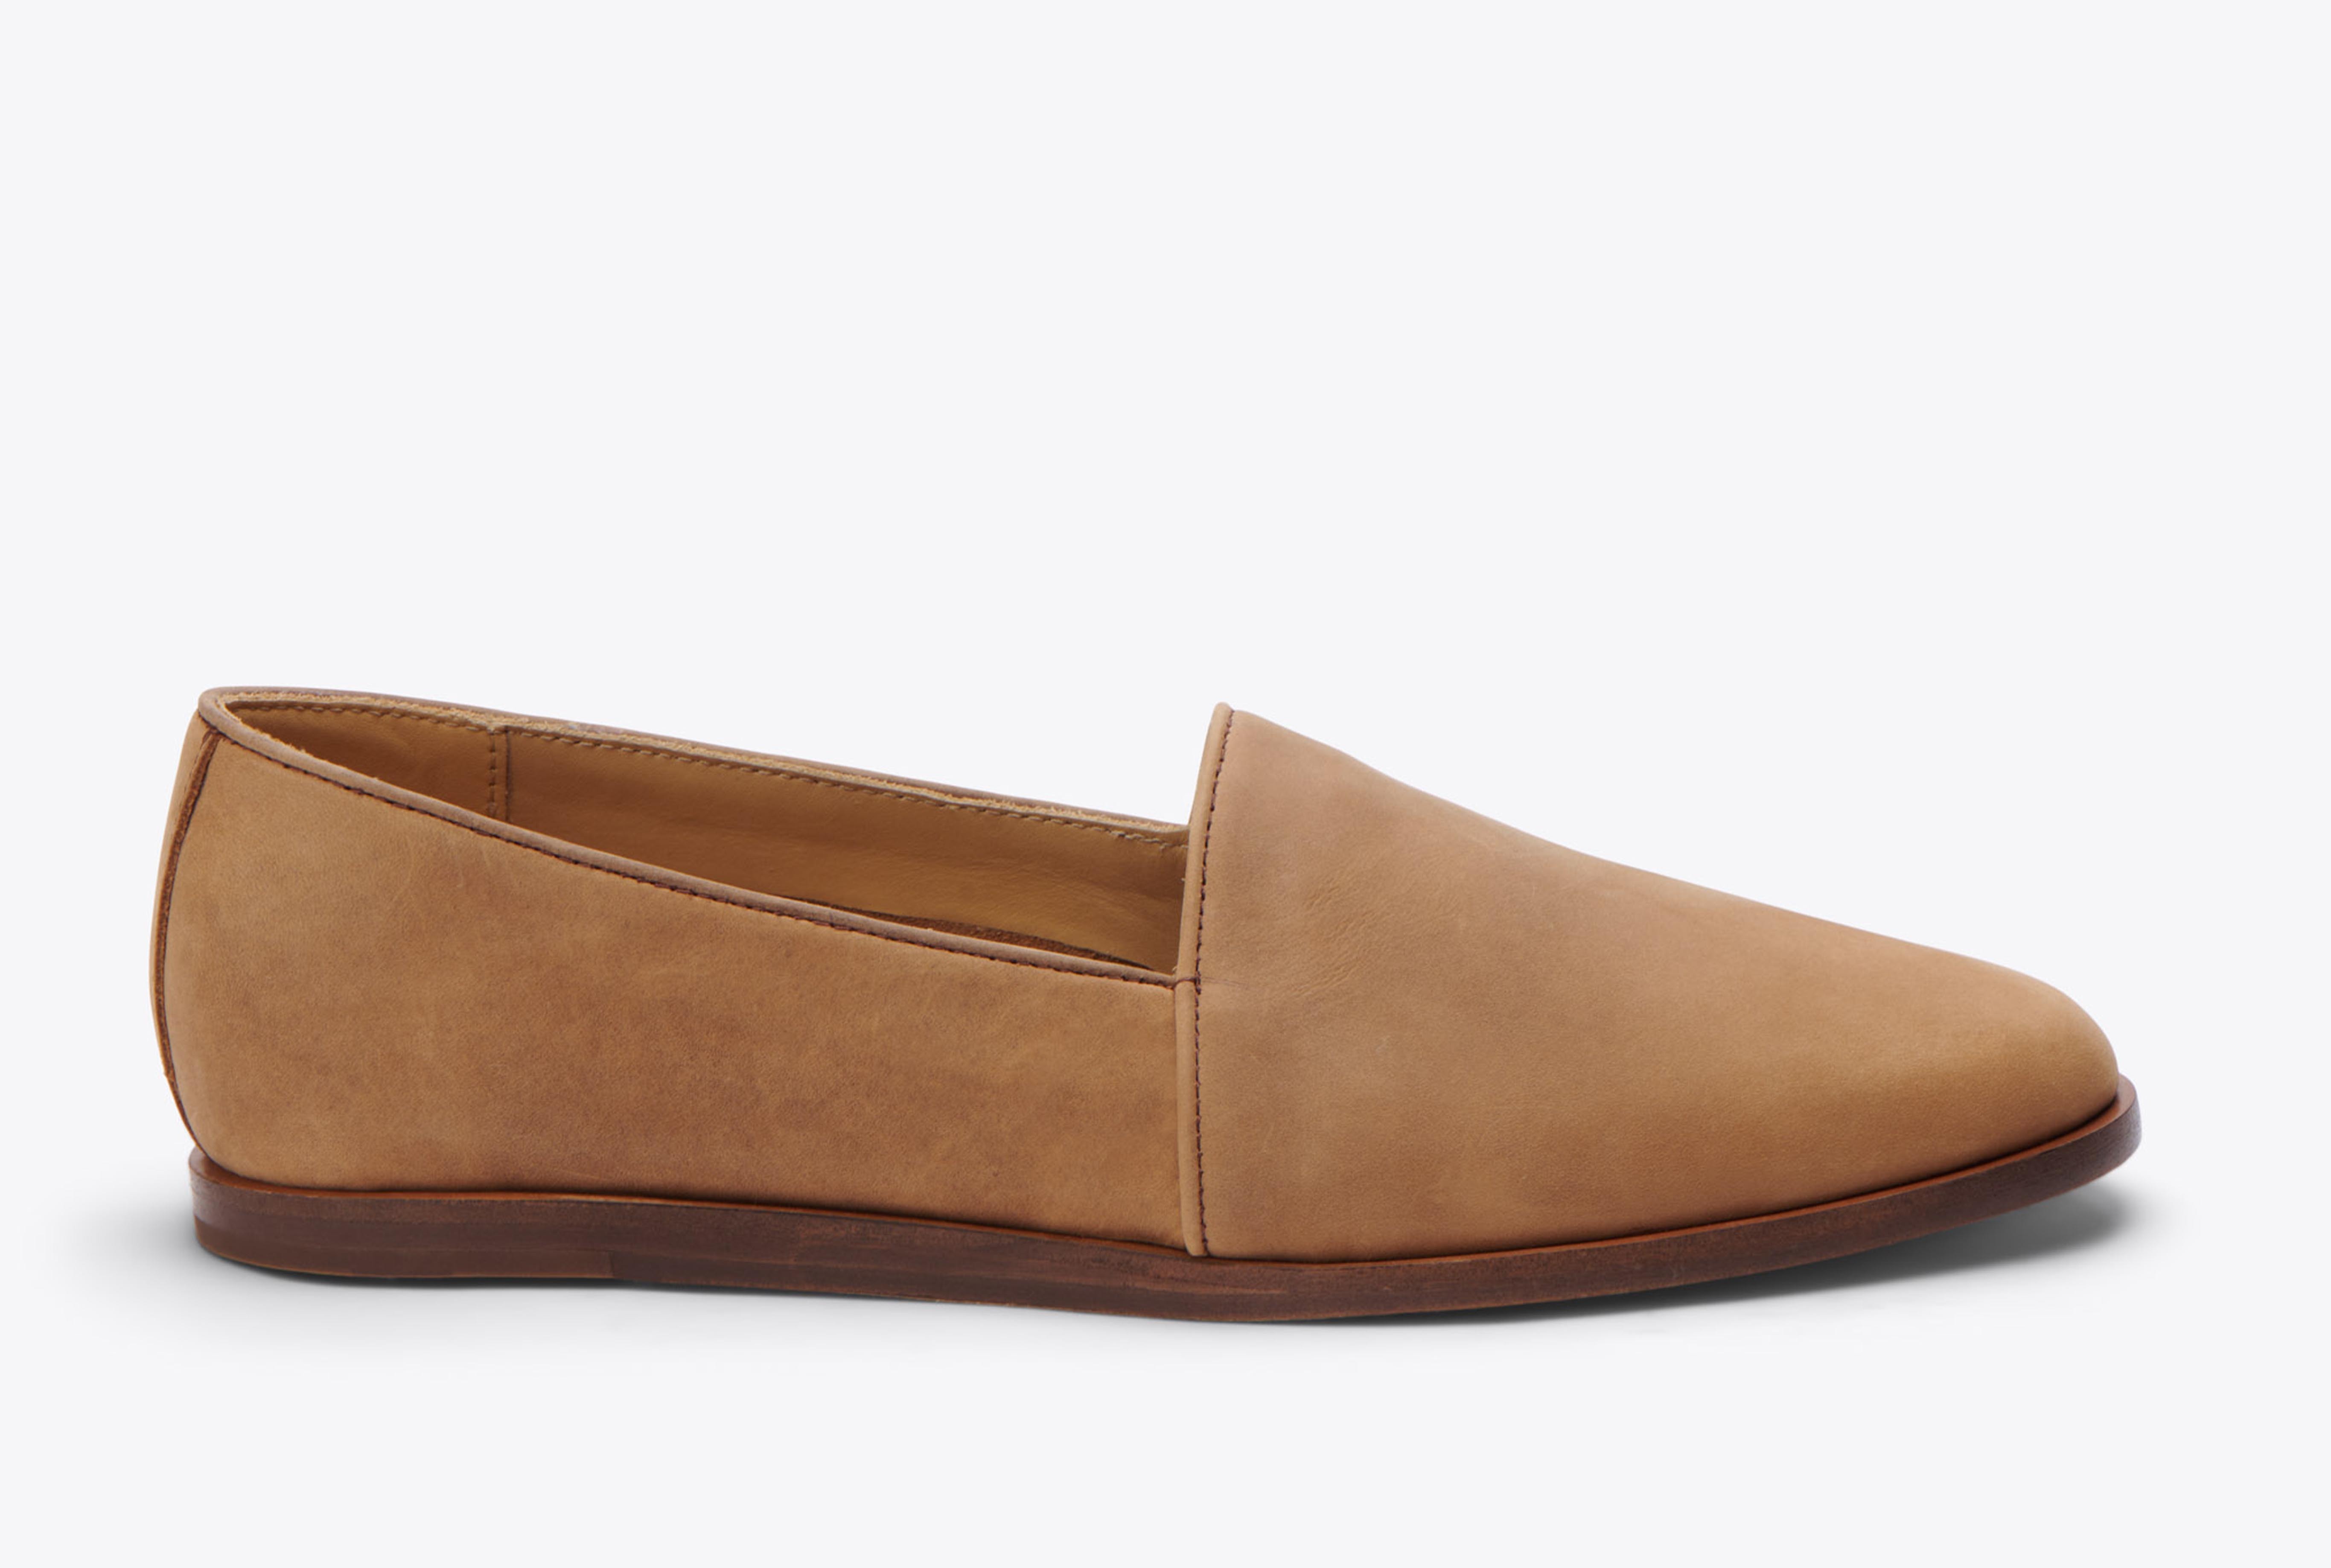 Nisolo Alejandro Slip On Tobacco - Every Nisolo product is built on the foundation of comfort, function, and design. 